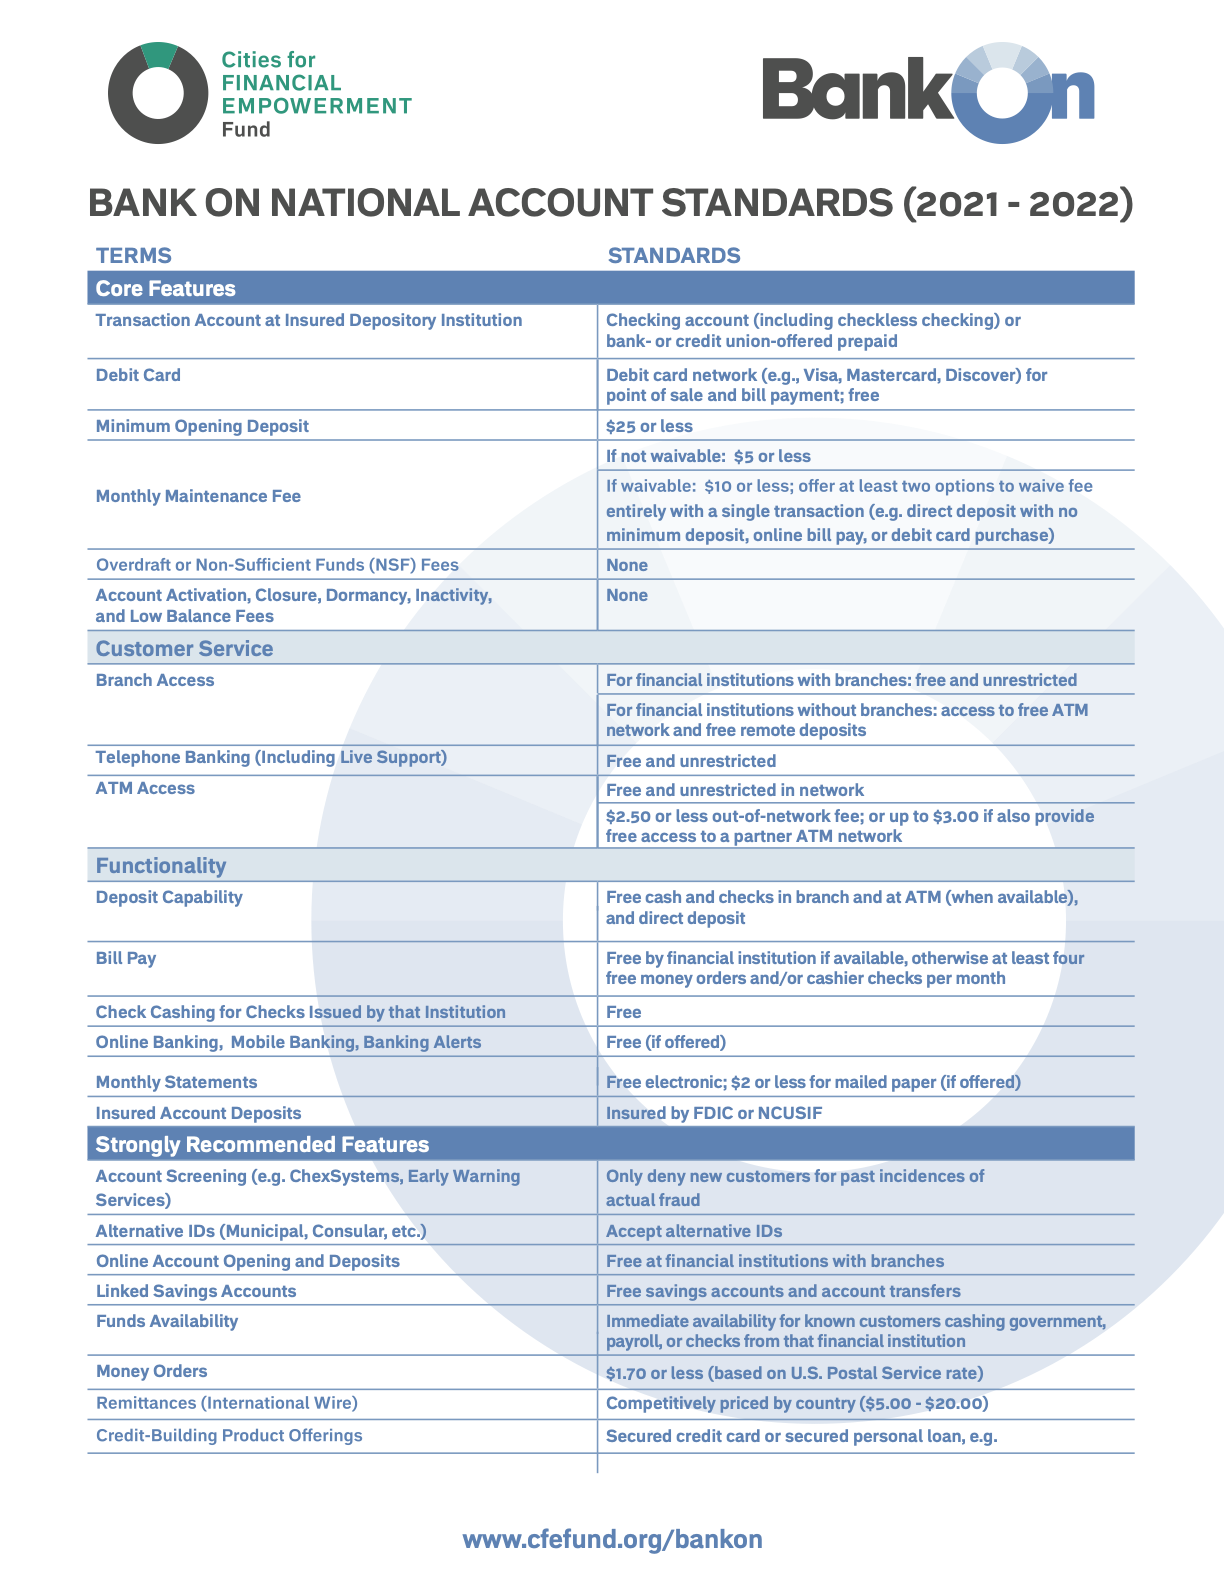 Bank On National Account Standarrds